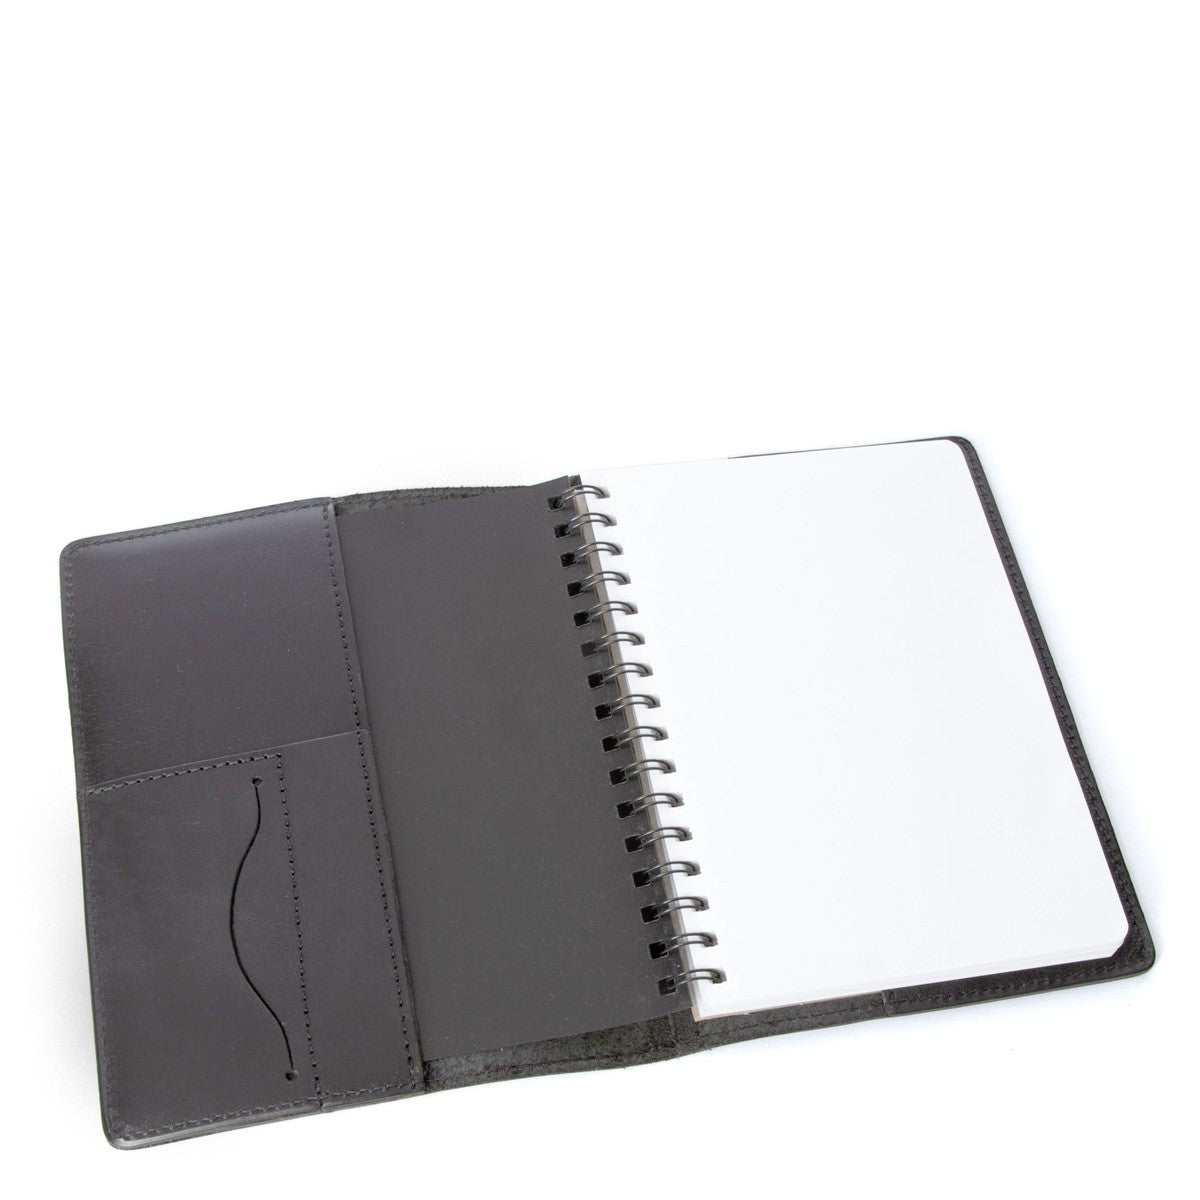 Swags A5 Book Cover - Black